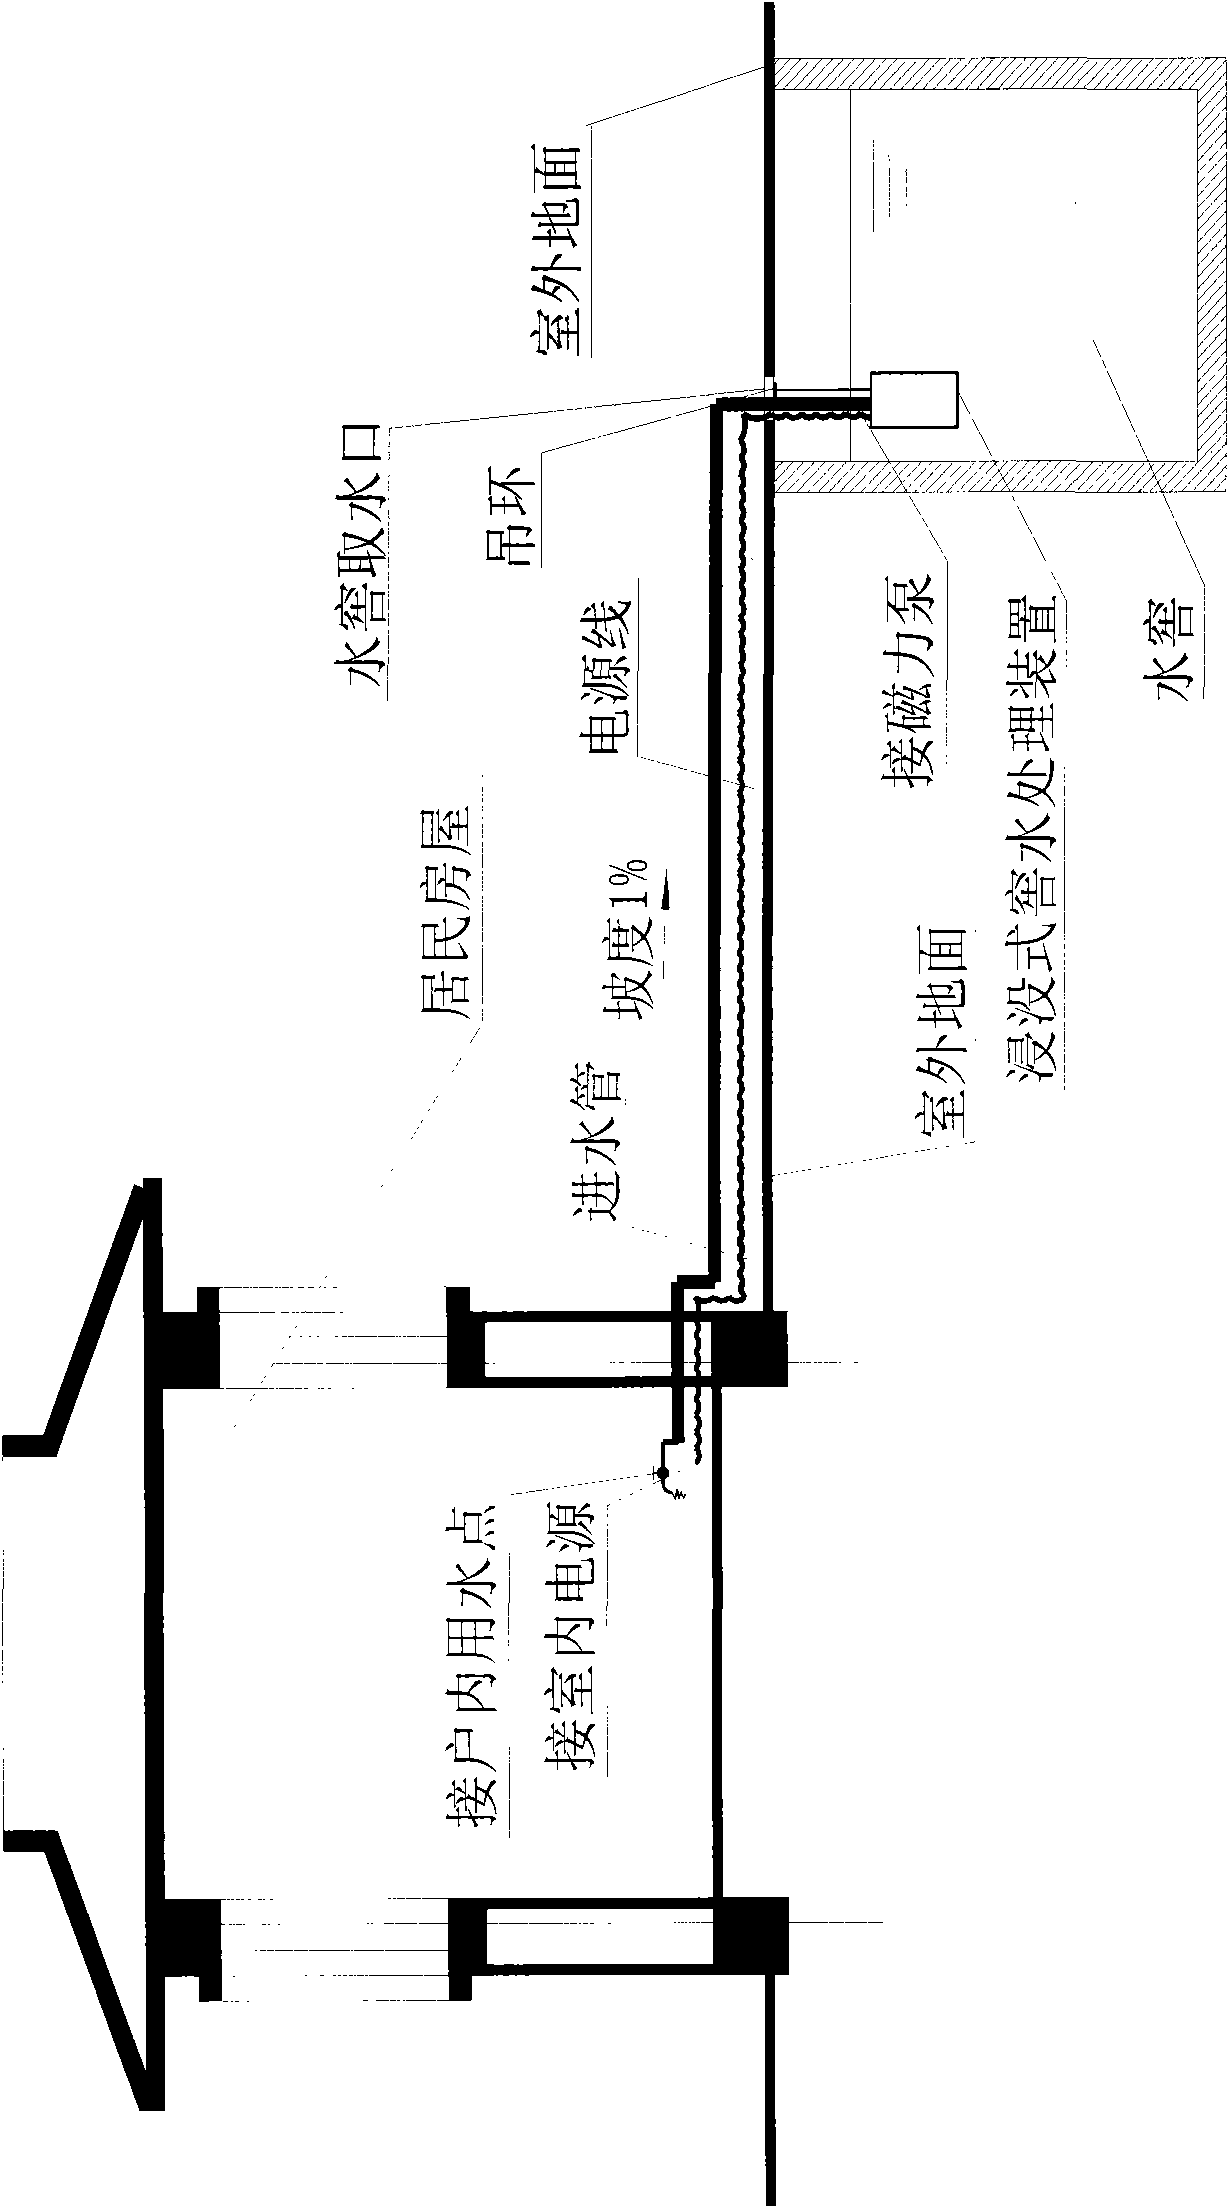 Combined-submerged pit water process and equipment